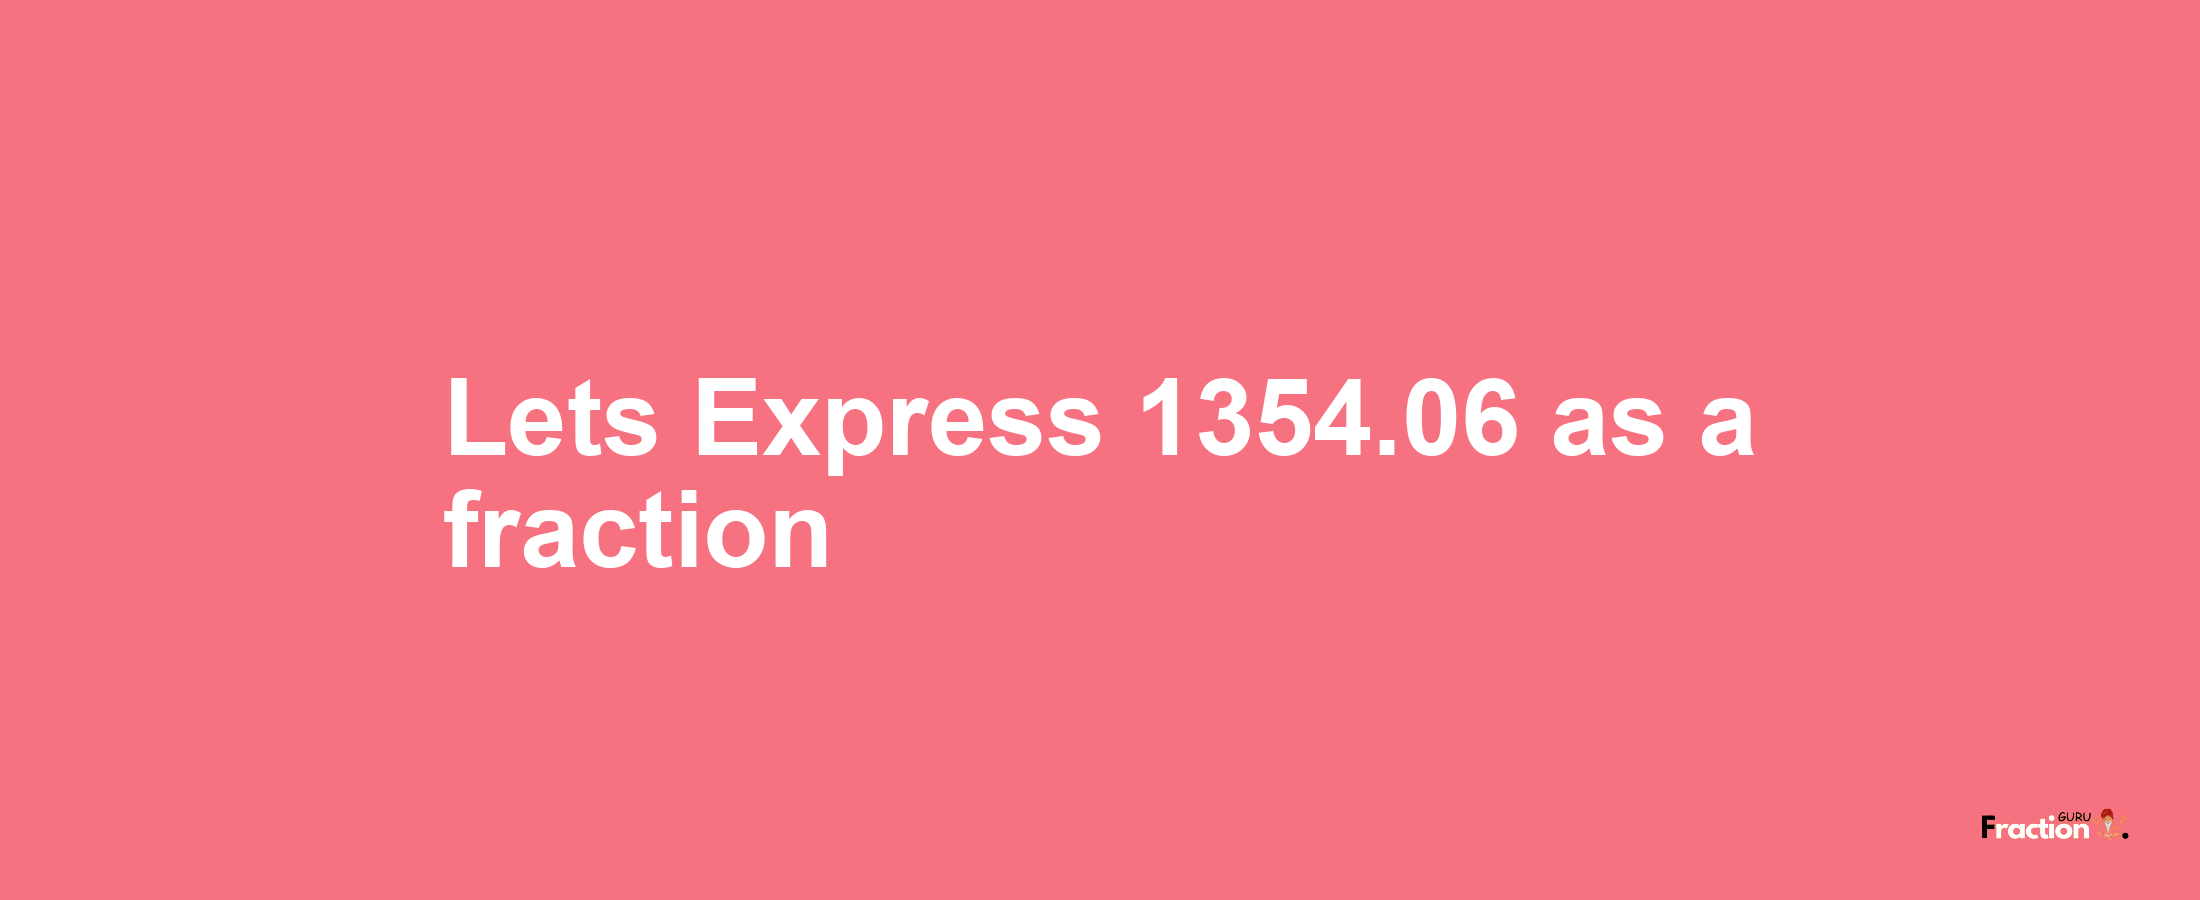 Lets Express 1354.06 as afraction